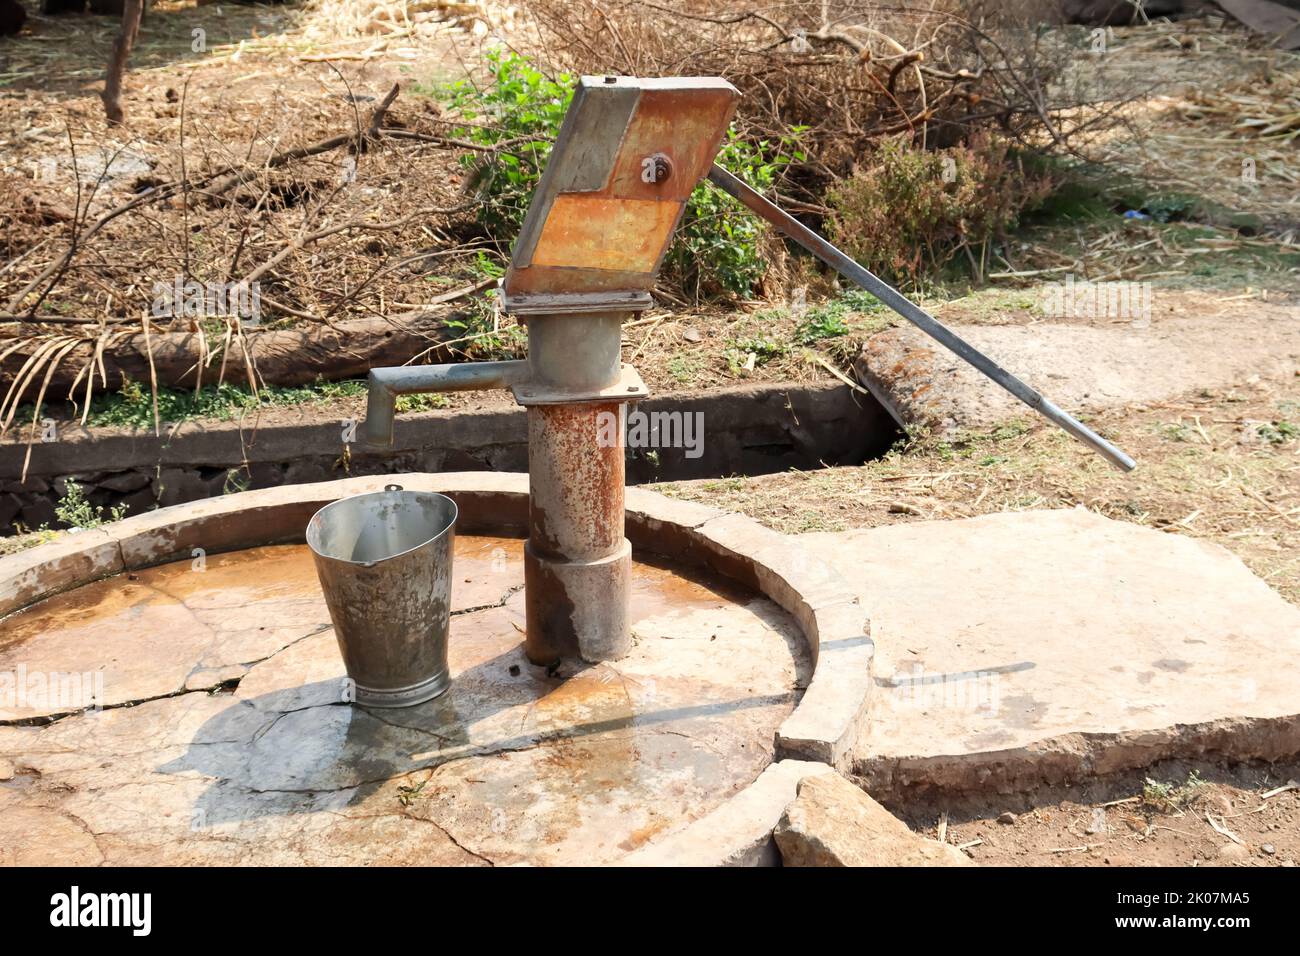 Hand Pump old method of extracting water from well in India Stock Photo